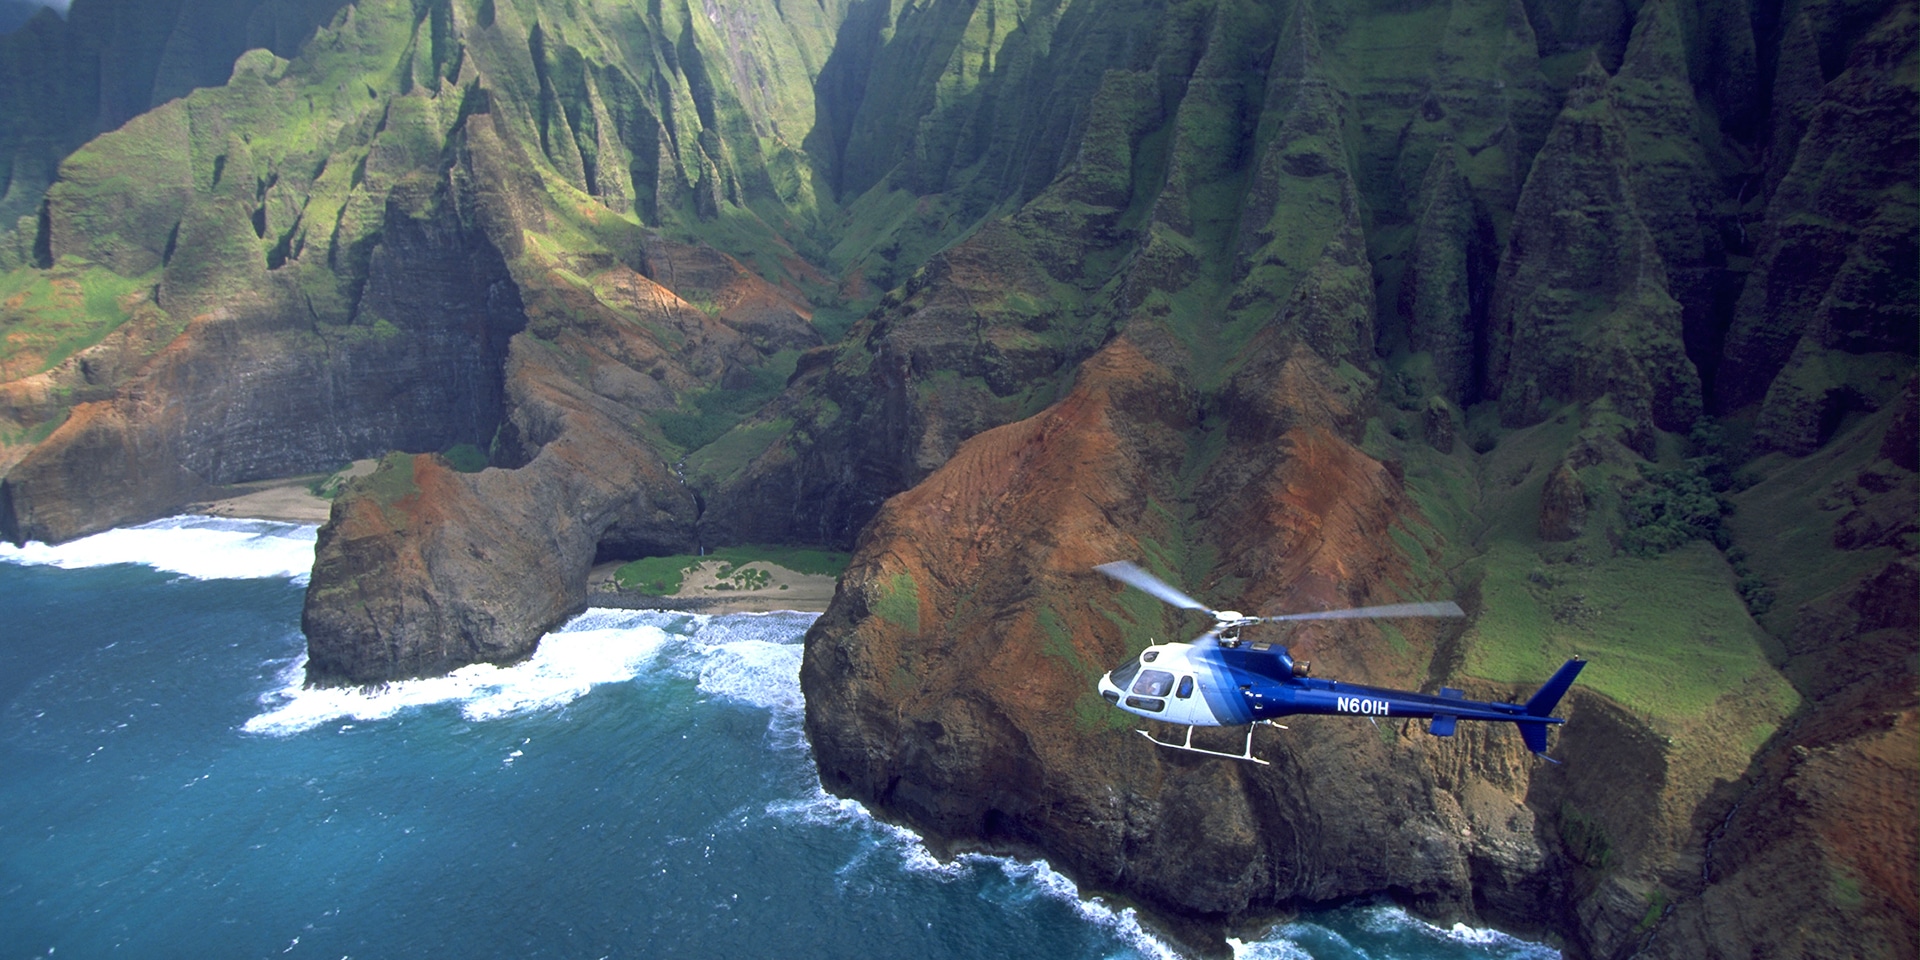 Hawaii helicopter